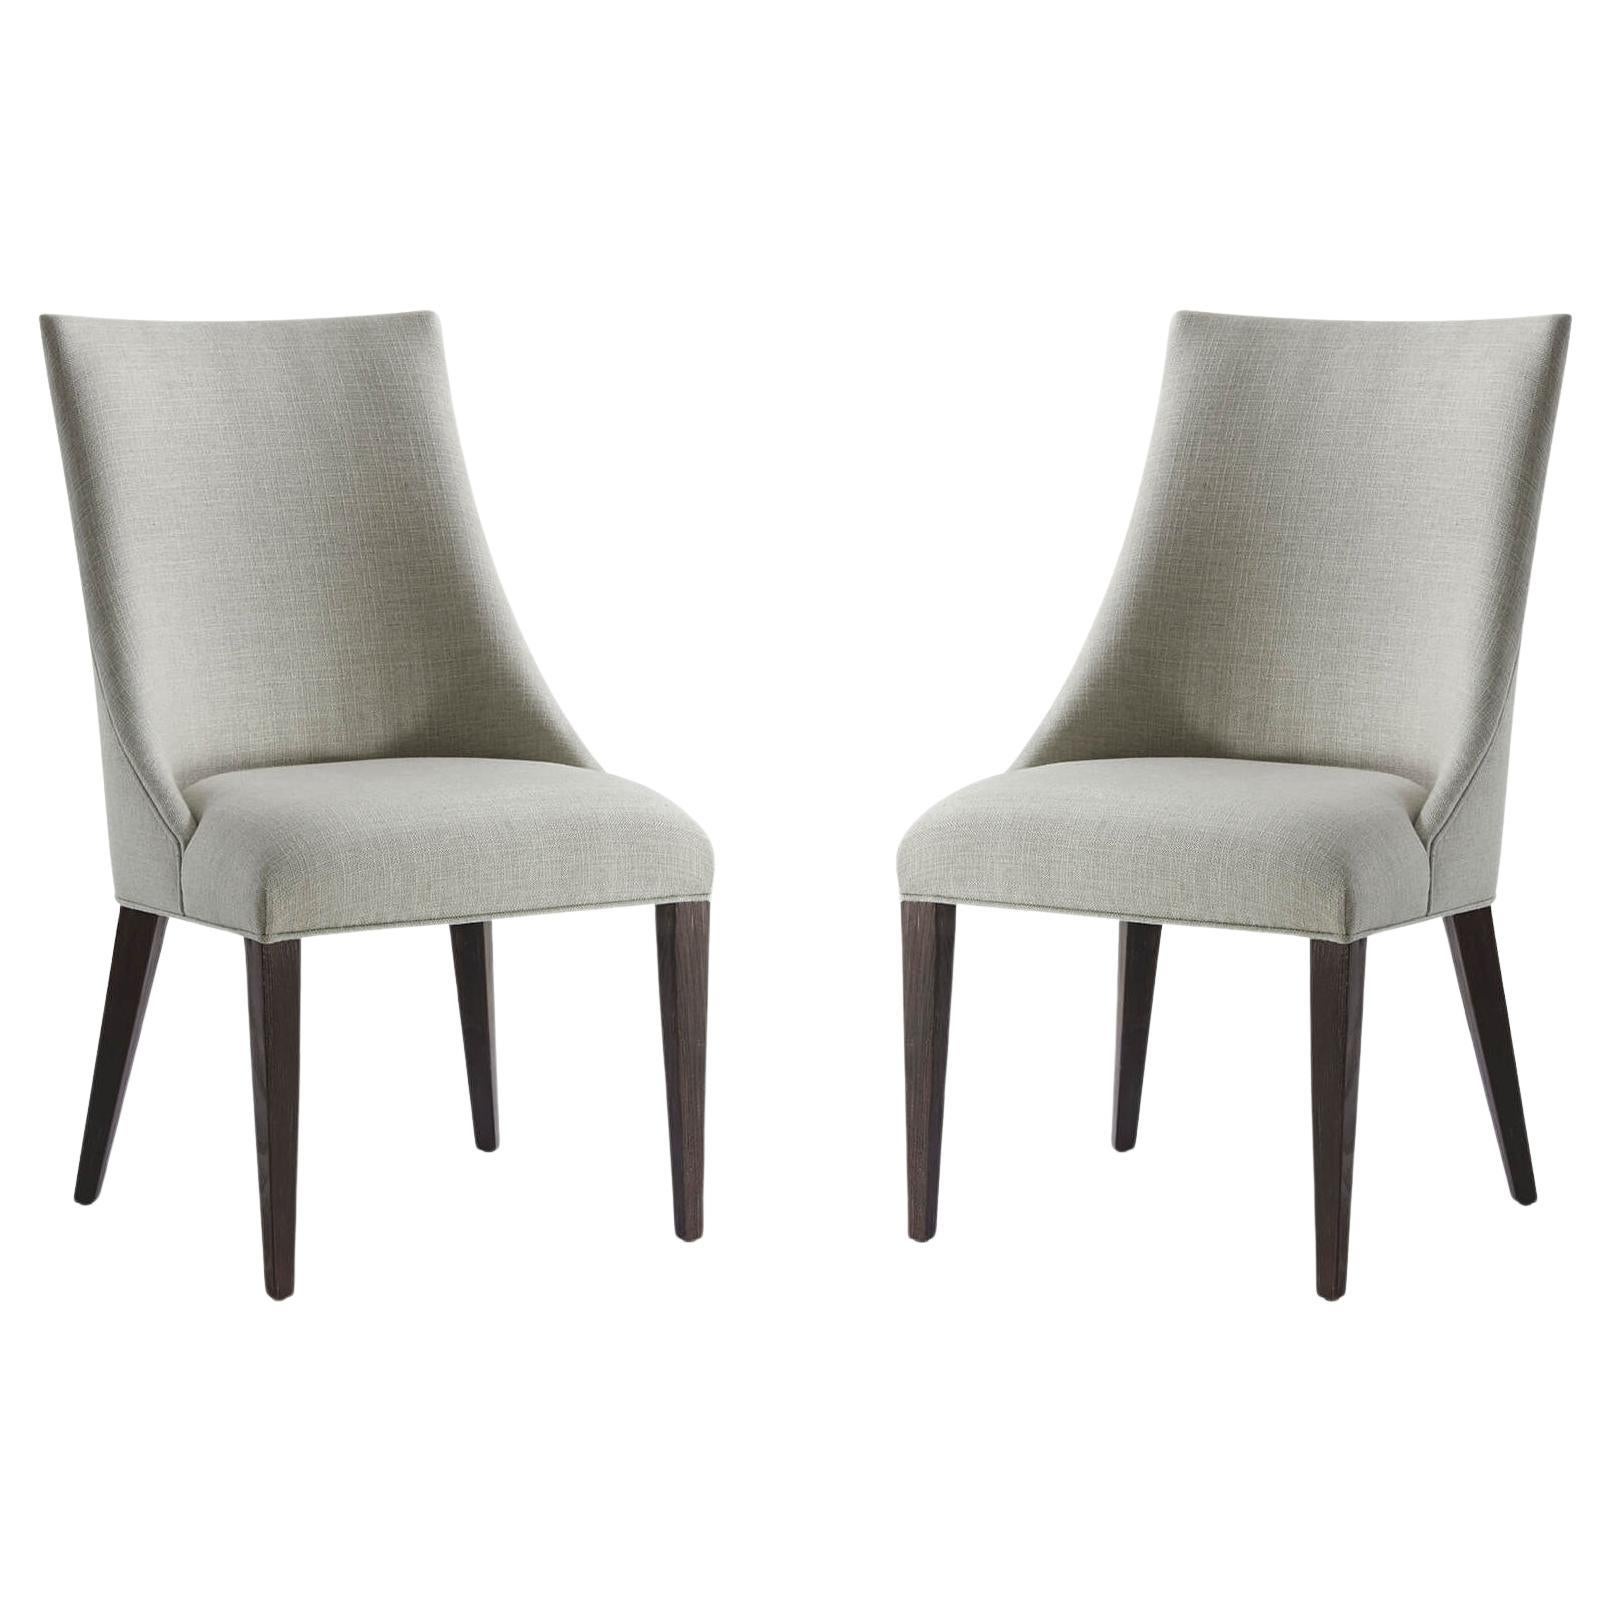 Two Classic Upholstered Scoop Back Side Chairs - Dark Rowan For Sale